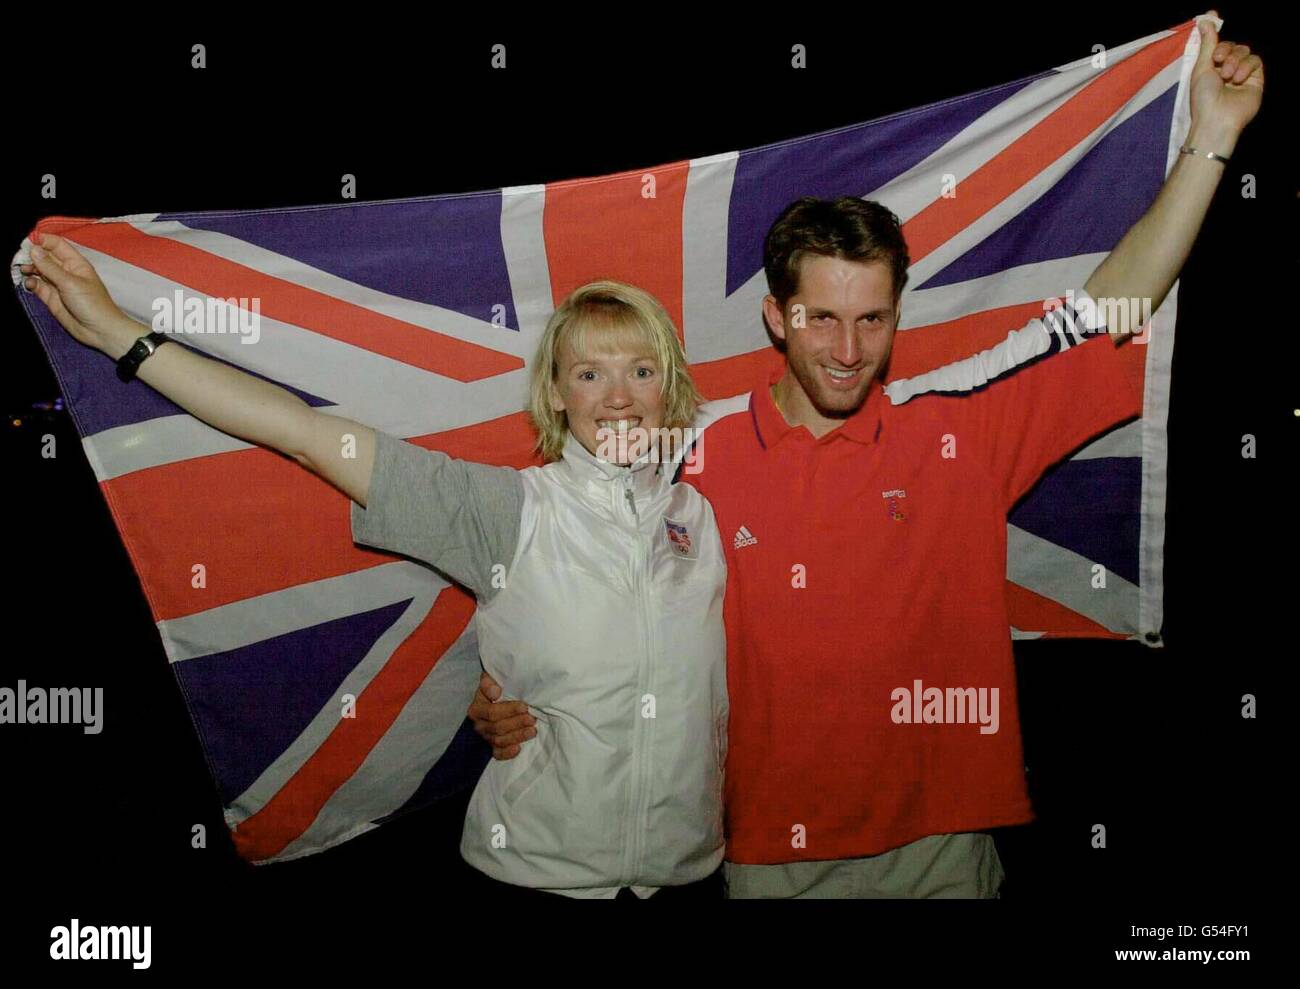 Great Britain's Shirley Robertson and Ben Ainslie celebrate their Gold medal success at the Olympic Games in Sydney. Robertson won the Women's Europe Sailing class while Ainslie took first place in the Laser Sailing class. Stock Photo